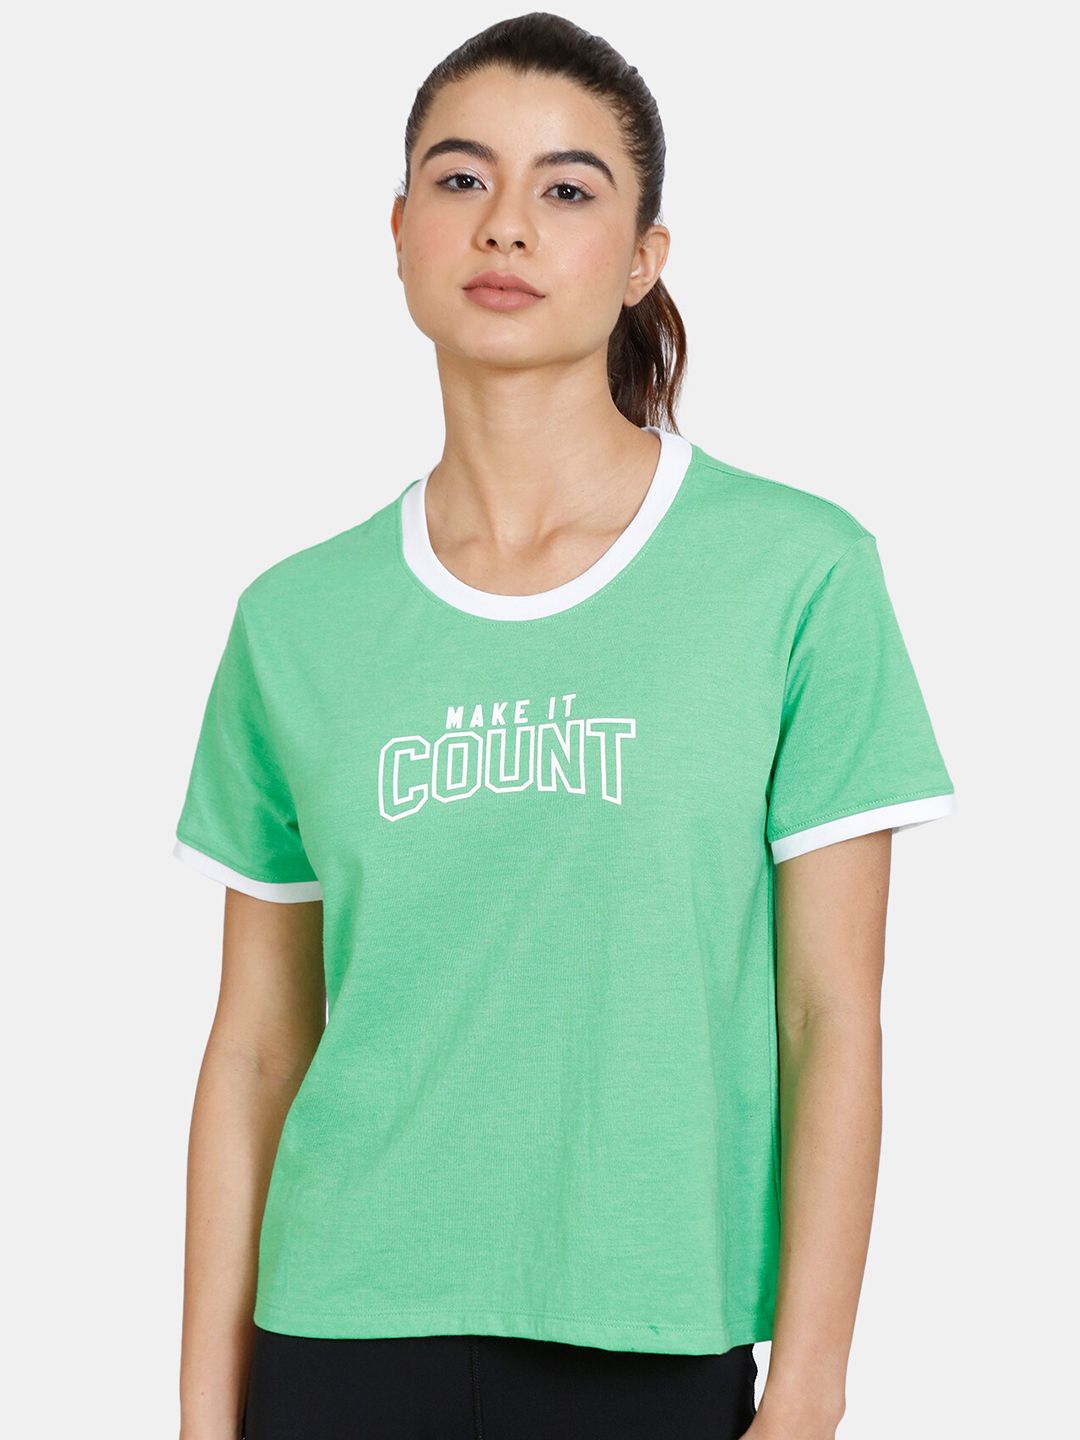 Rosaline by Zivame Women Green & White Typography Printed T-shirt Price in India